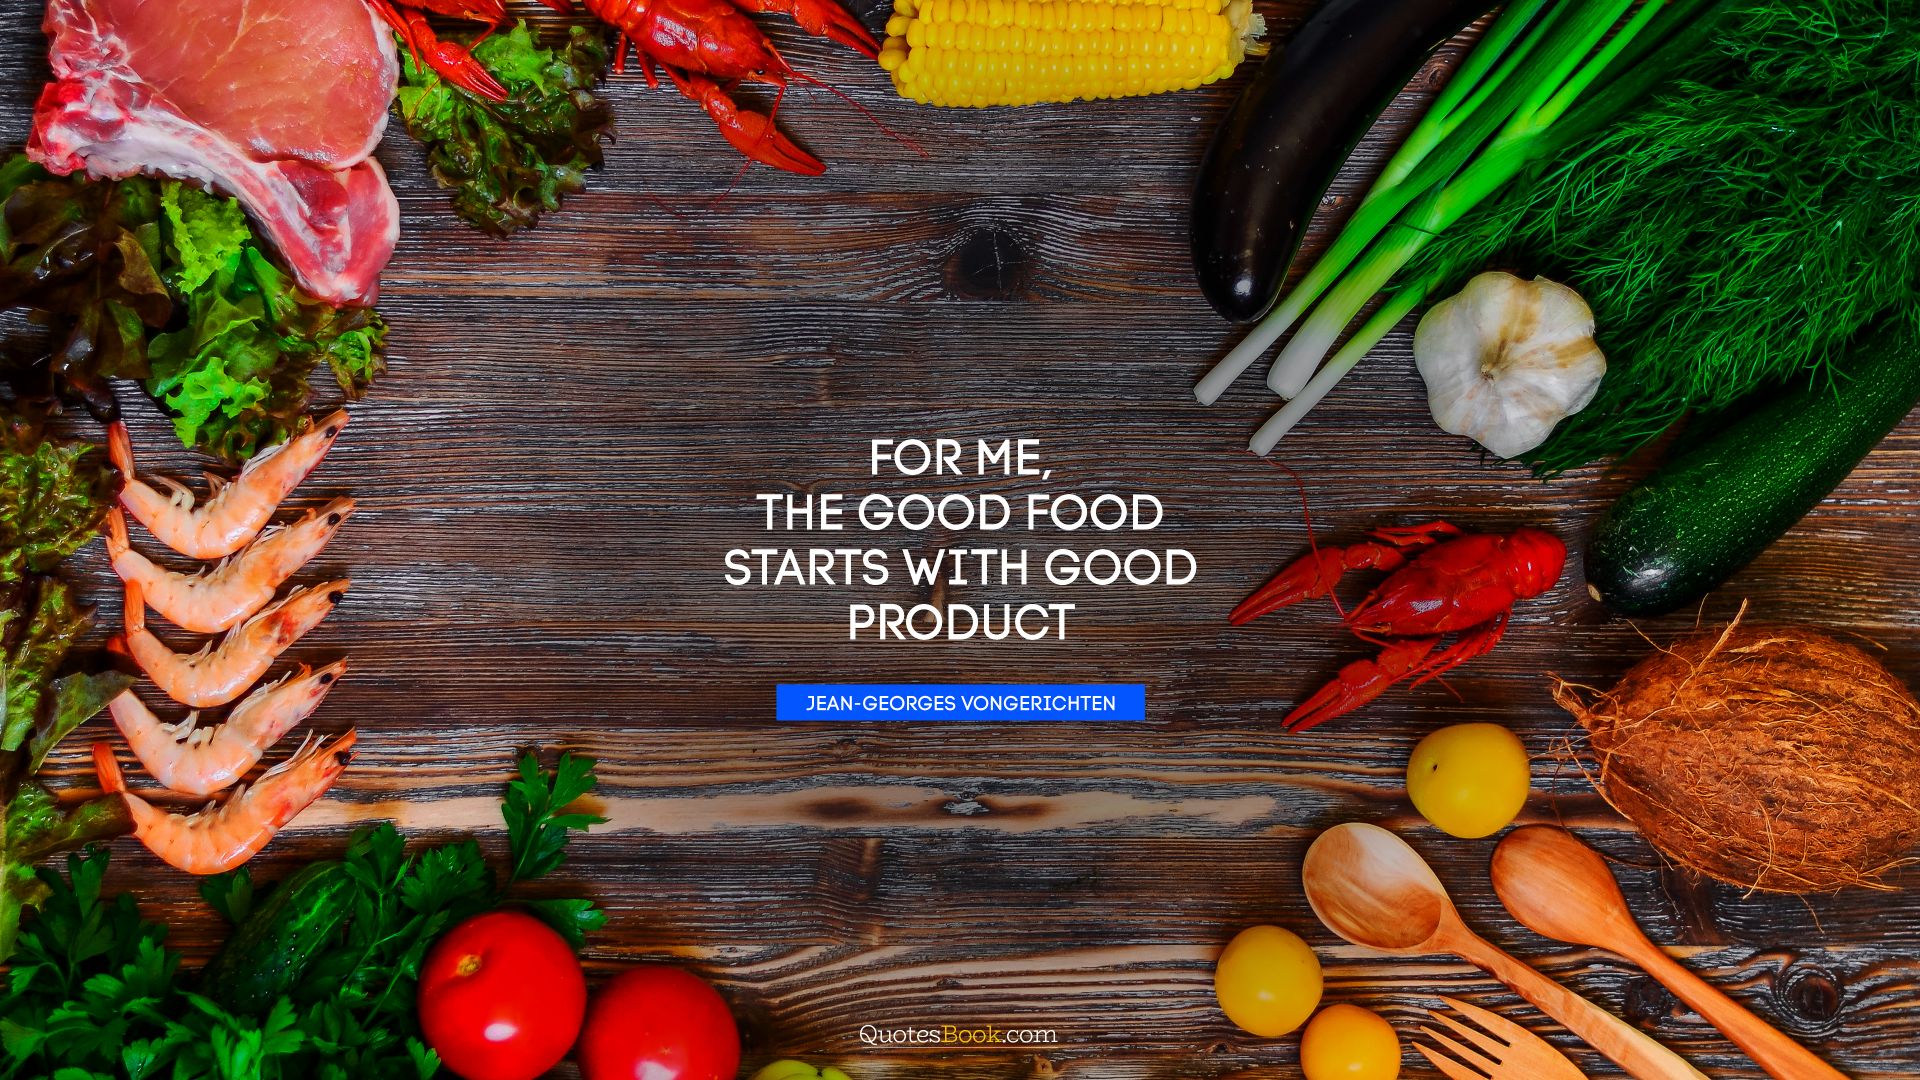 For me, the good food starts with good product. - Quote by Jean-Georges Vongerichten